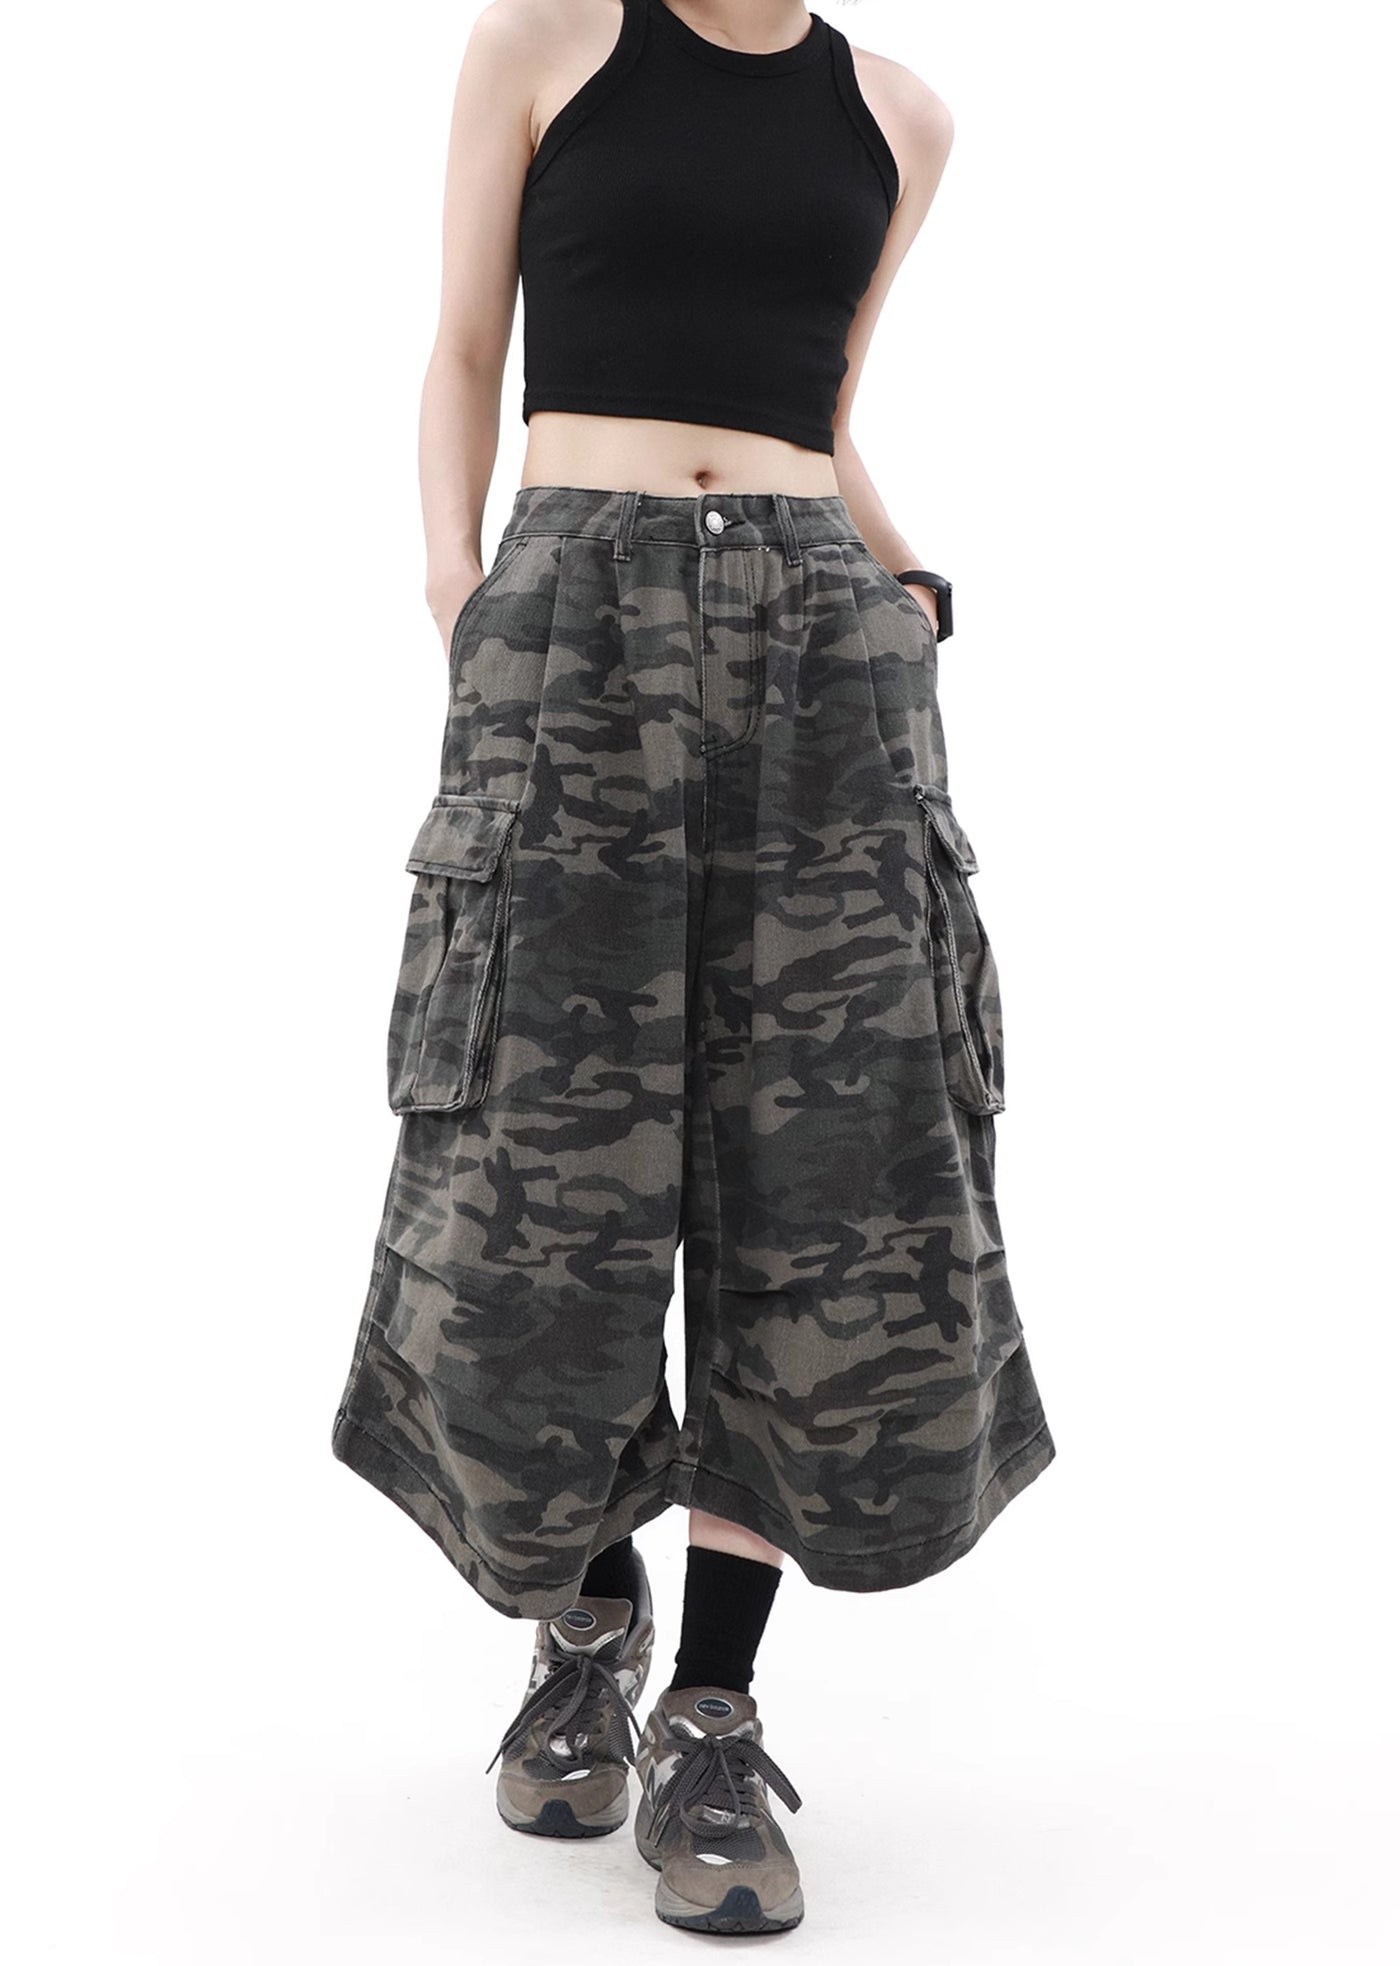 【MR nearly】Camouflage pattern double pocket design short silhouette cargo pants  MR0113